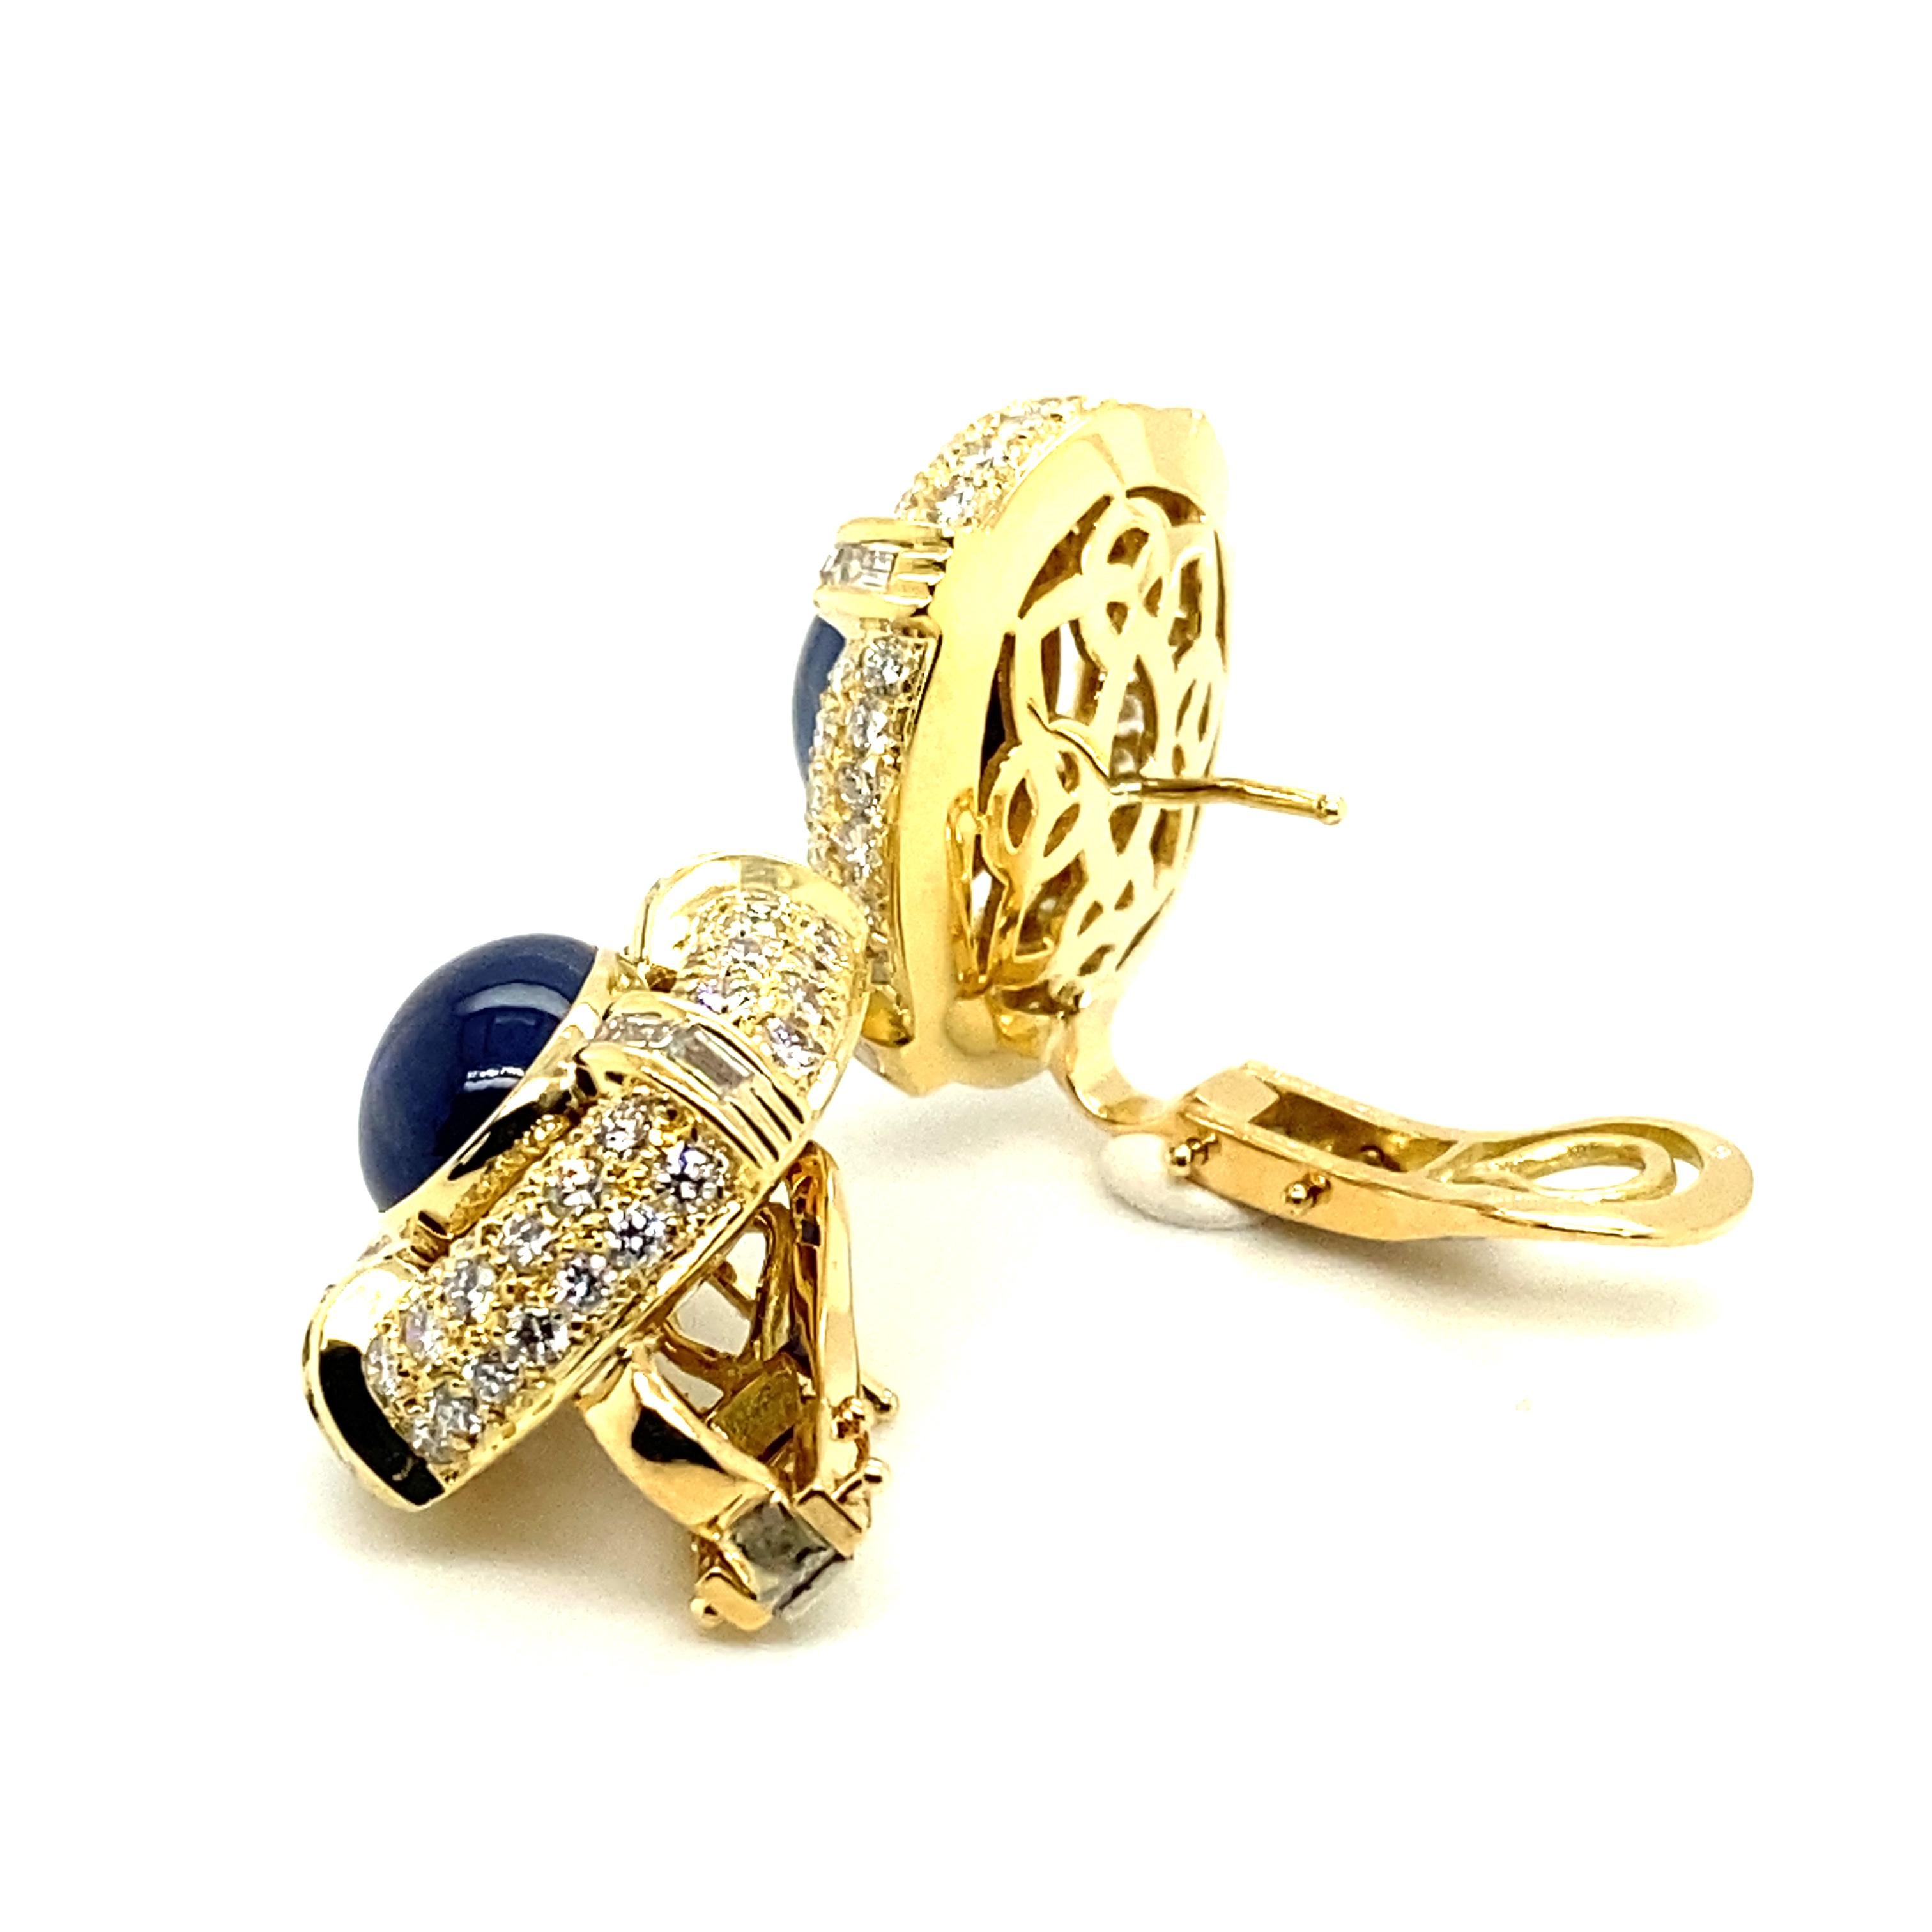 Sapphire and Diamond Earclips in 18 Karat Yellow Gold by MAYOR'S In Excellent Condition For Sale In Lucerne, CH